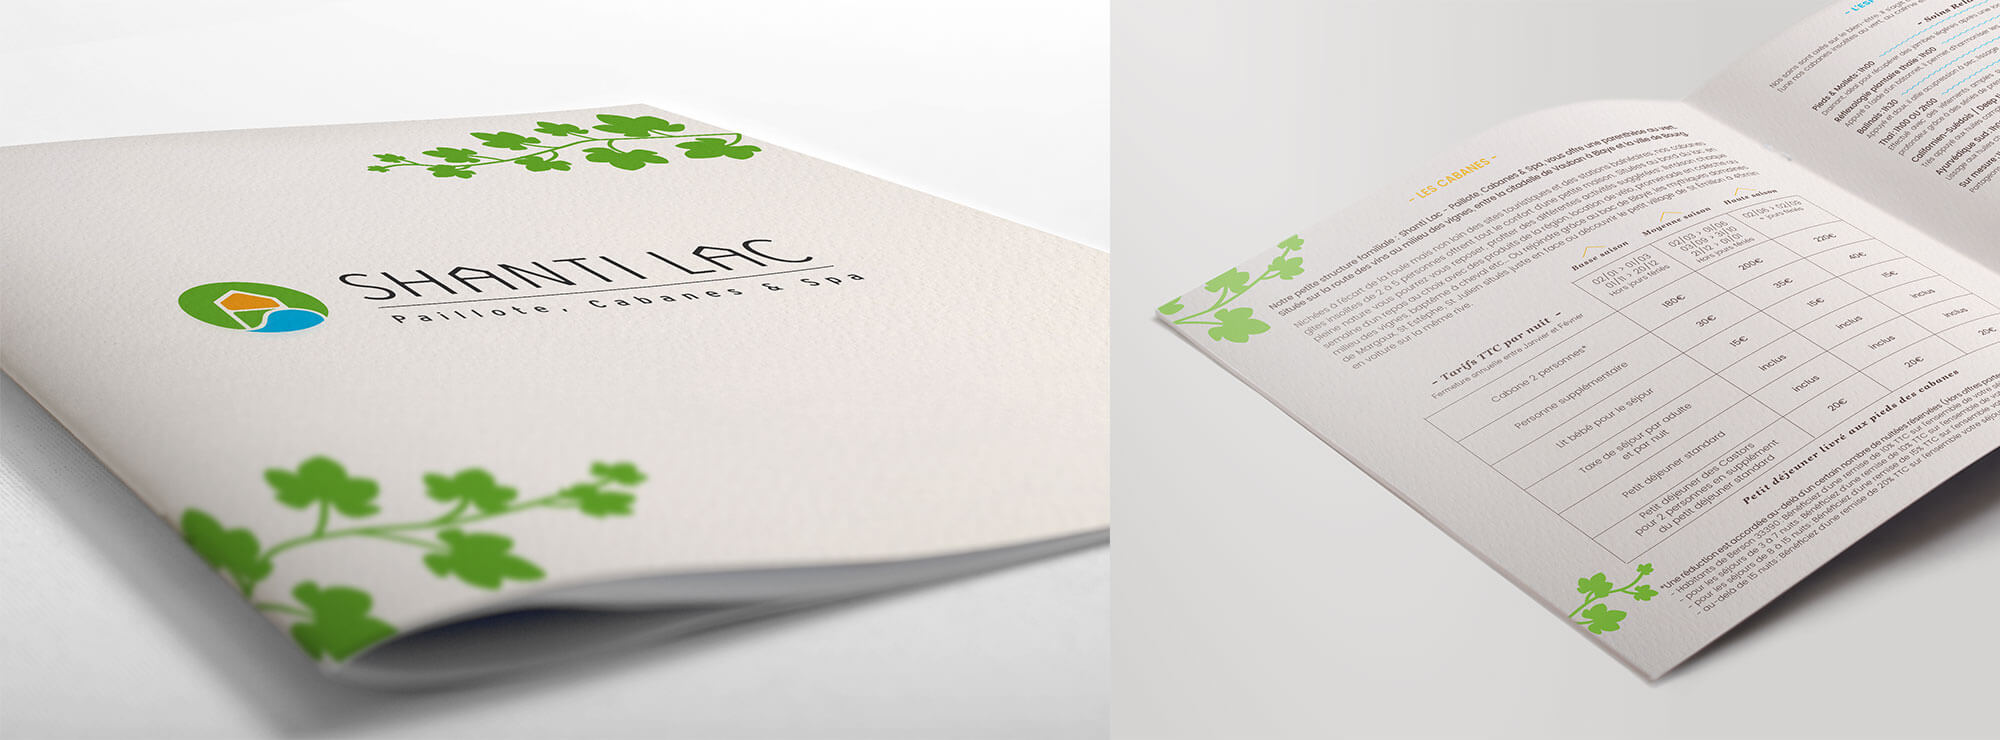 Shanti Lac - a graphic identity very natural